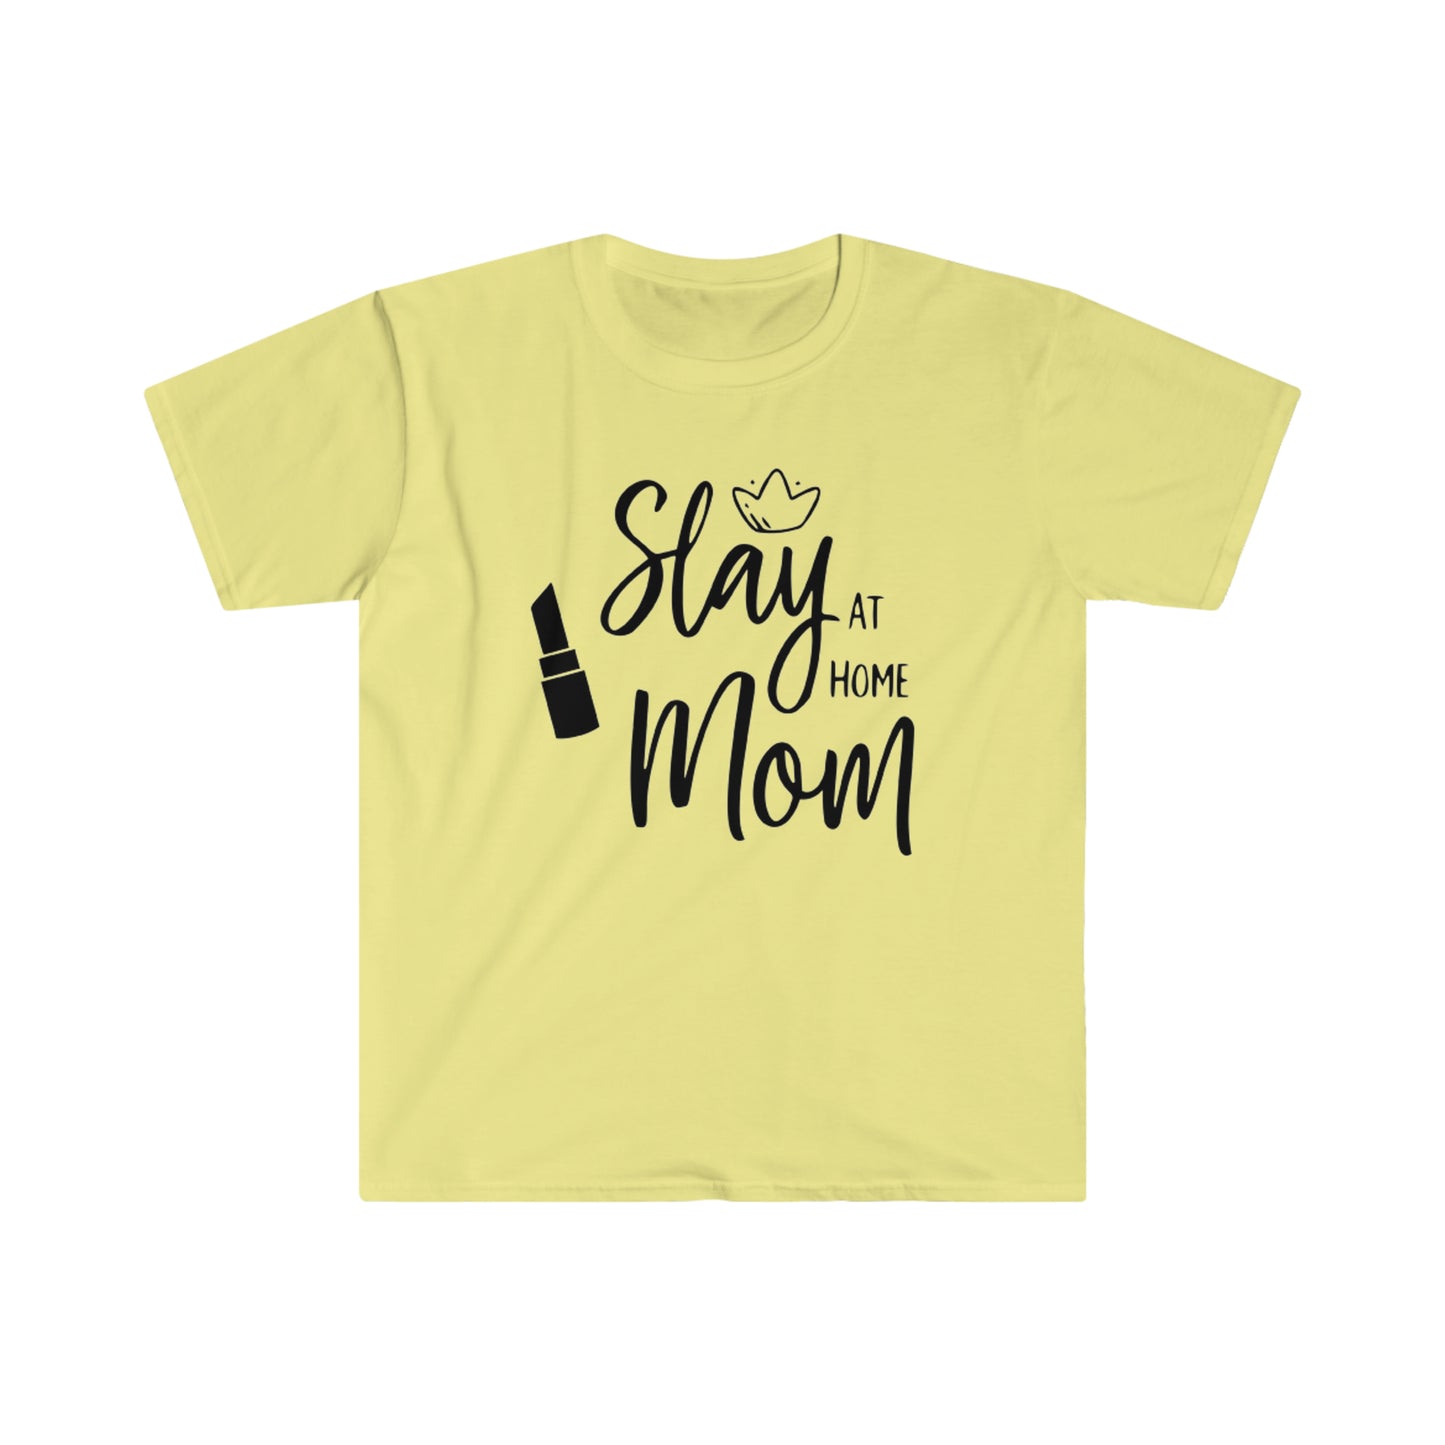 Slay at Home Mom - Unisex Softstyle T-Shirt